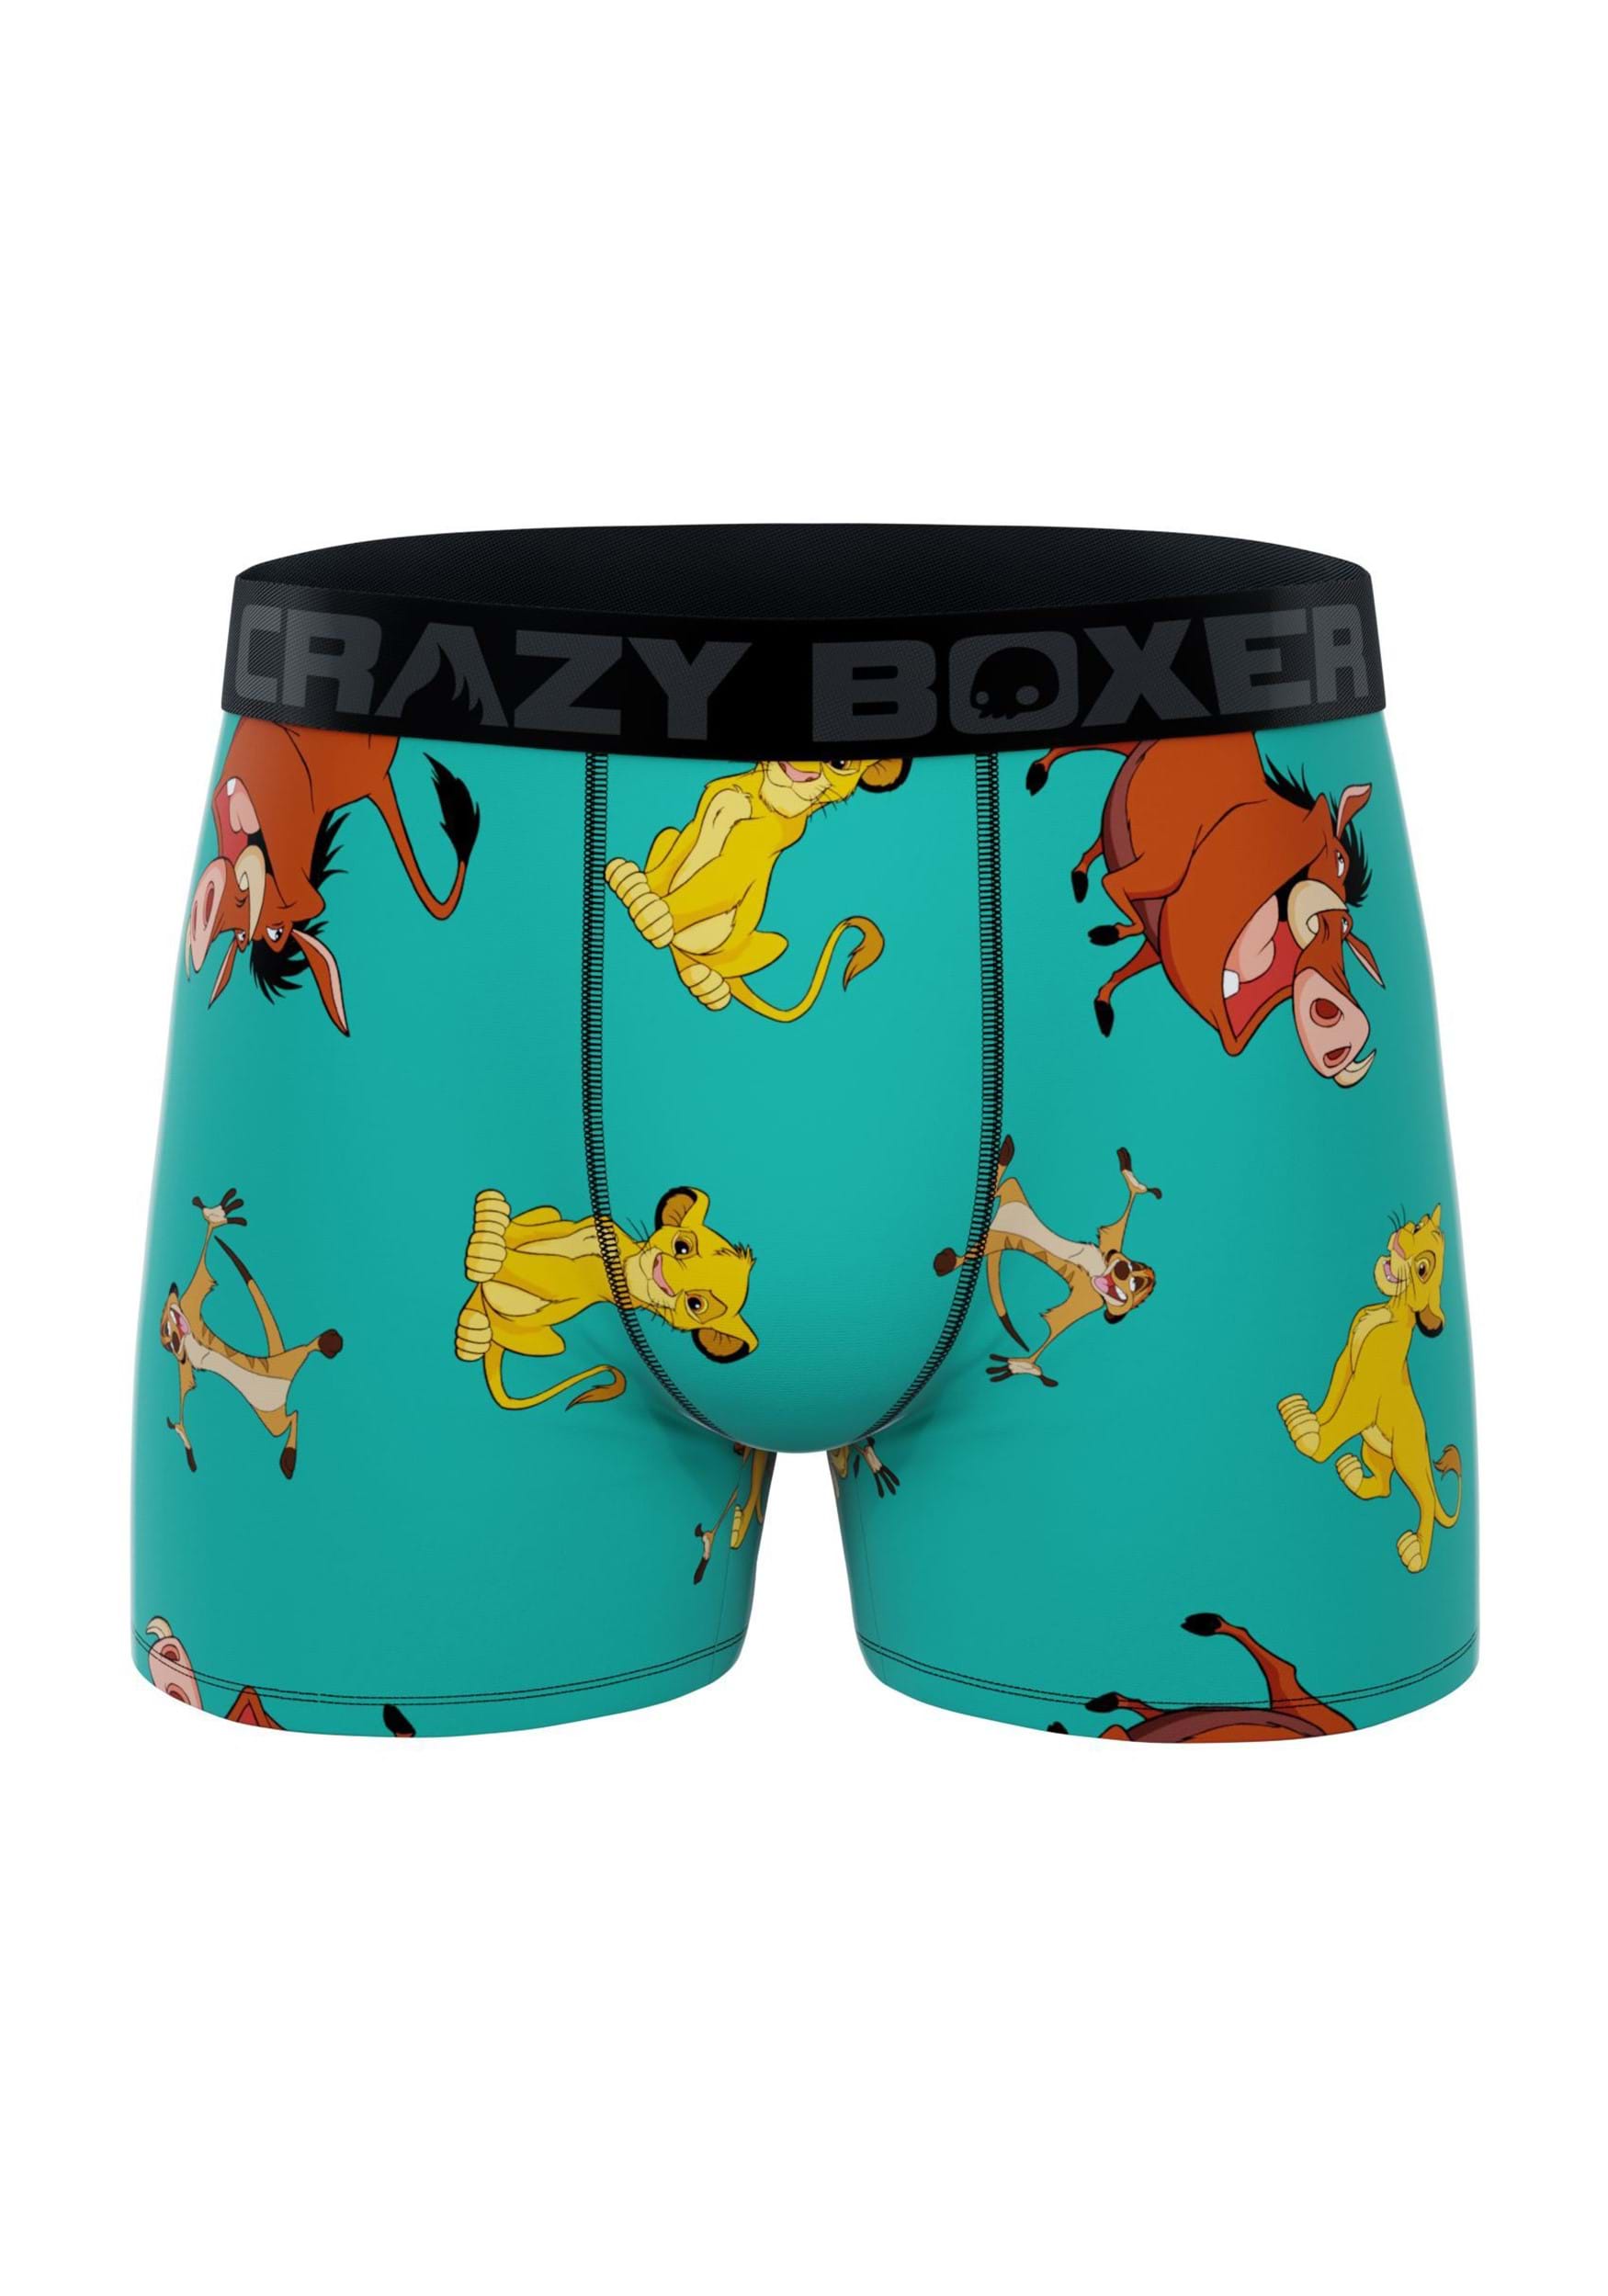 CRAZYBOXER Toy Story Drawing Men's Boxer Briefs